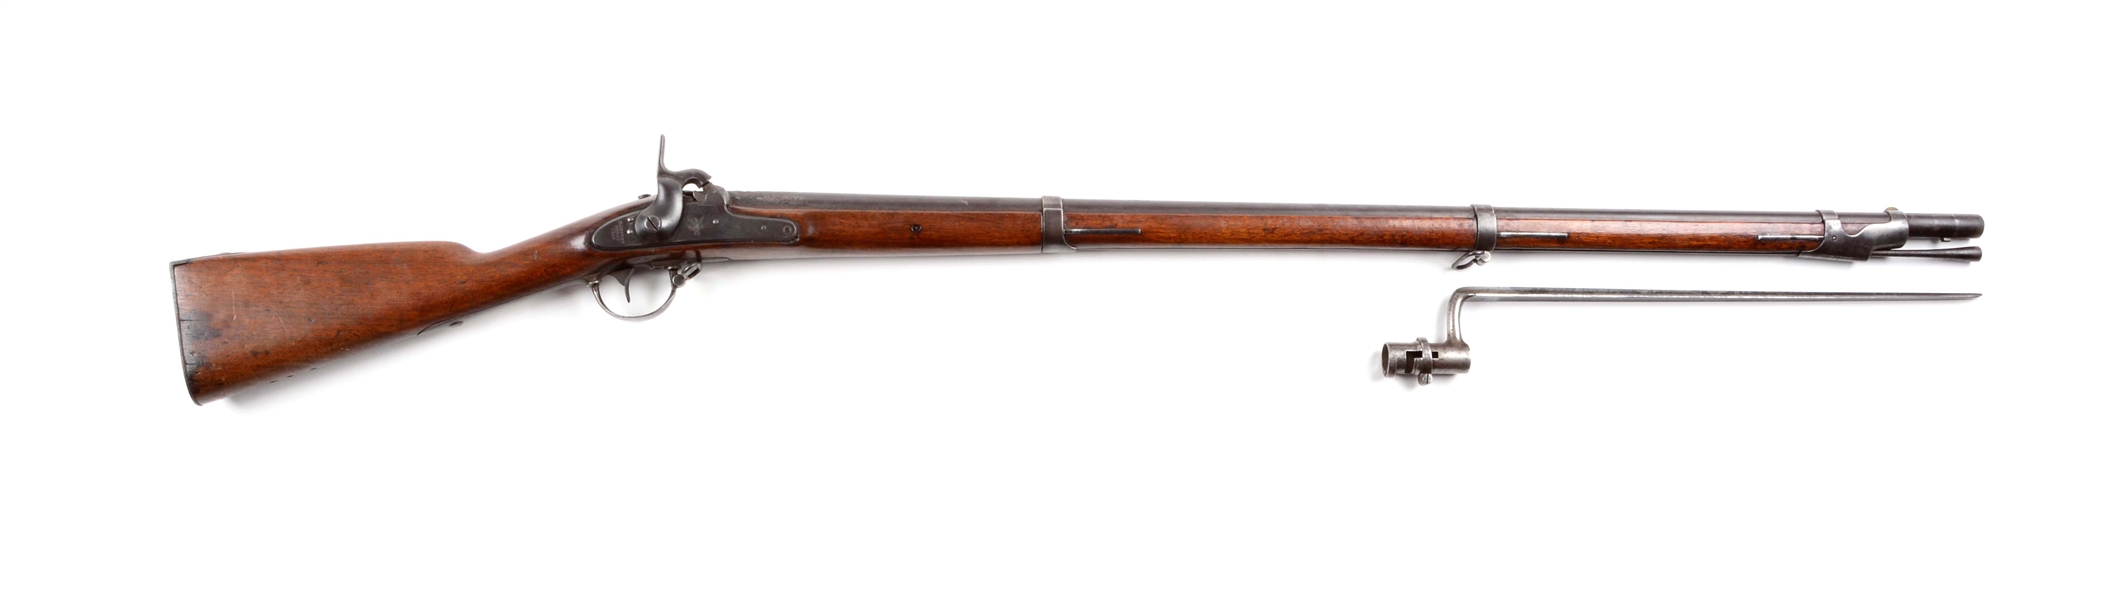 (A) U.S. MODEL 1842 HARPERS FERRY PERCUSSION MUSKET WITH BAYONET.